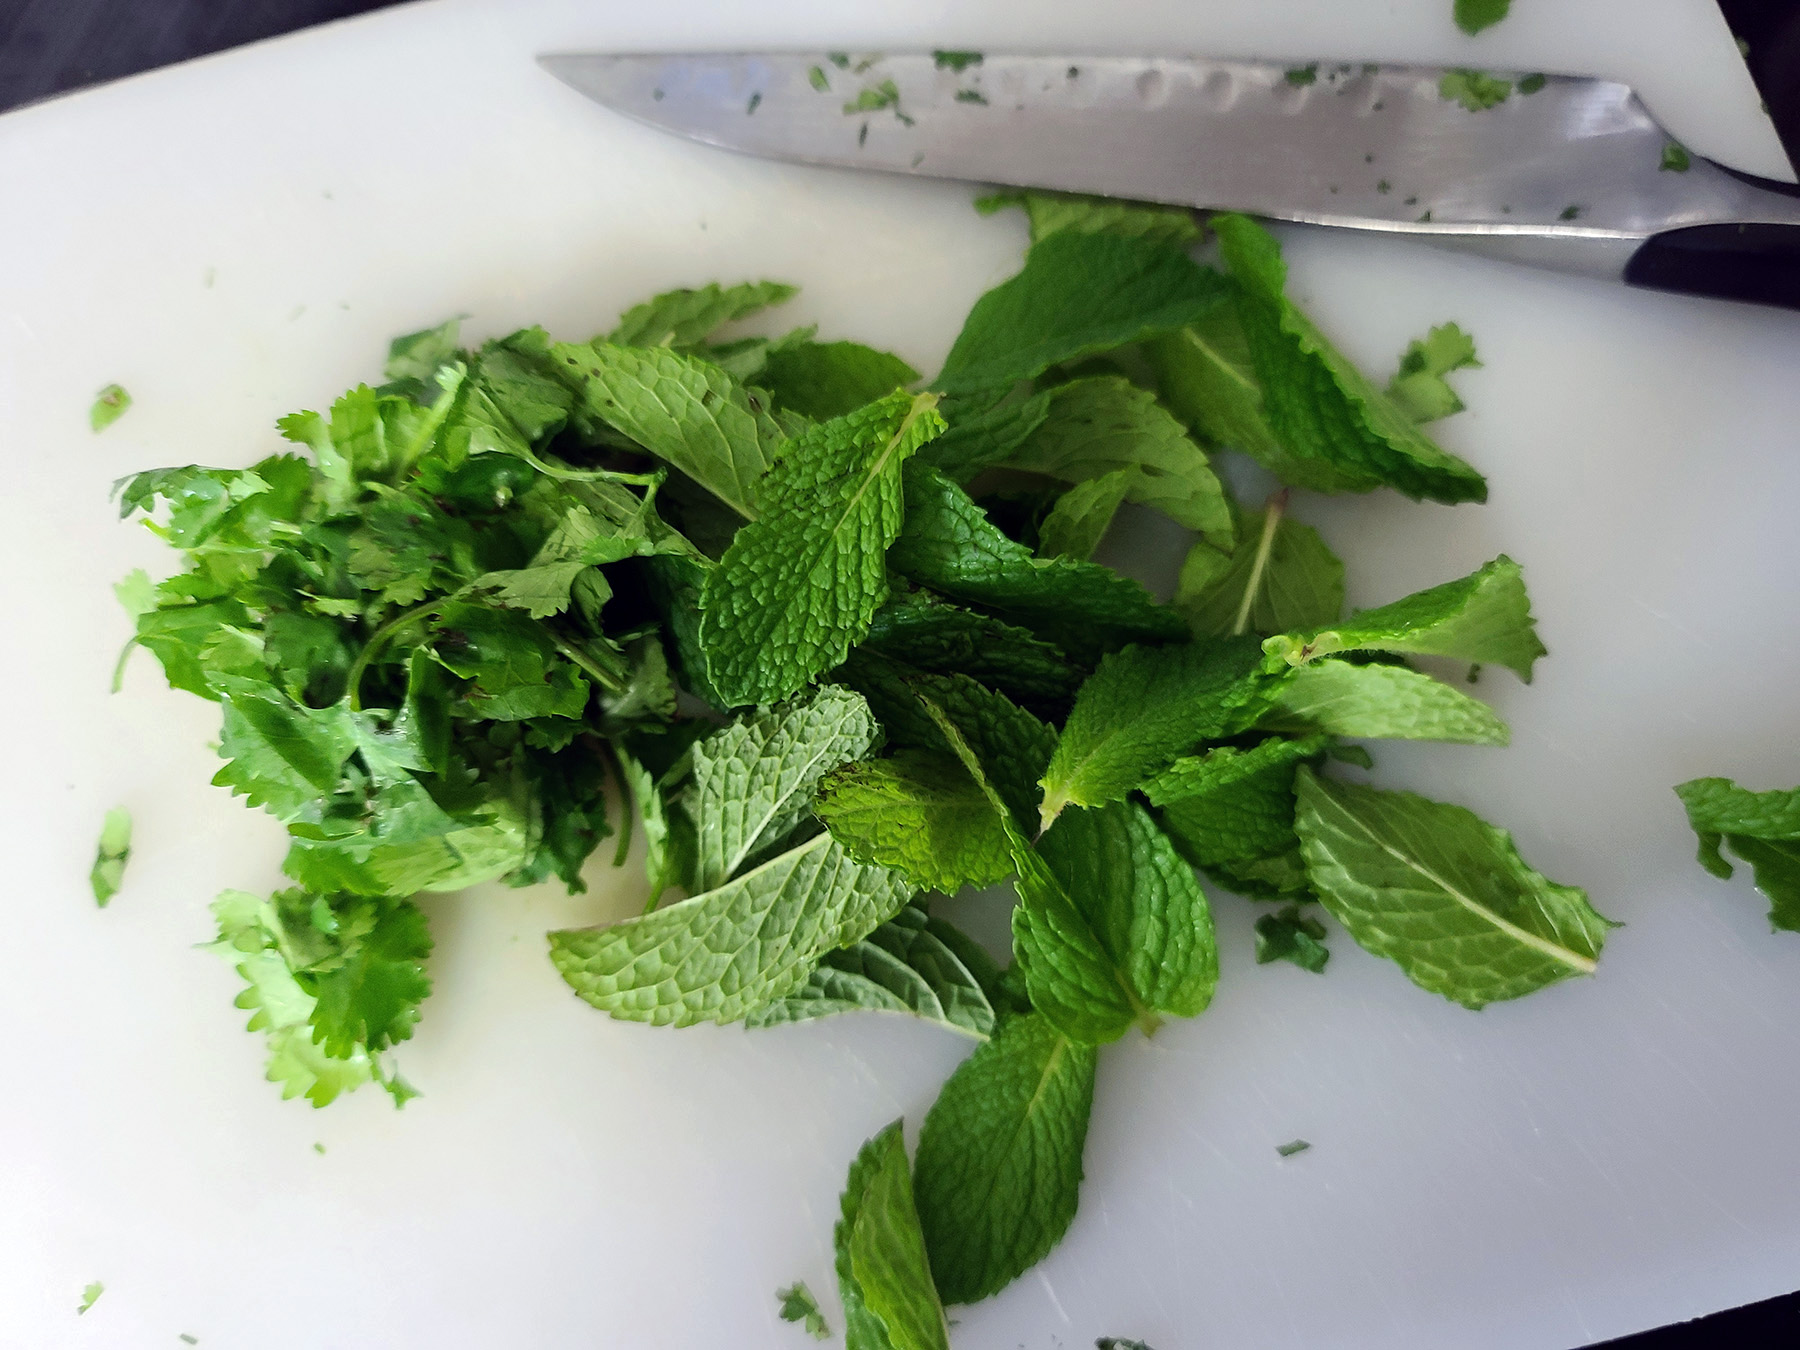 Cilantro and mint being chopped together.